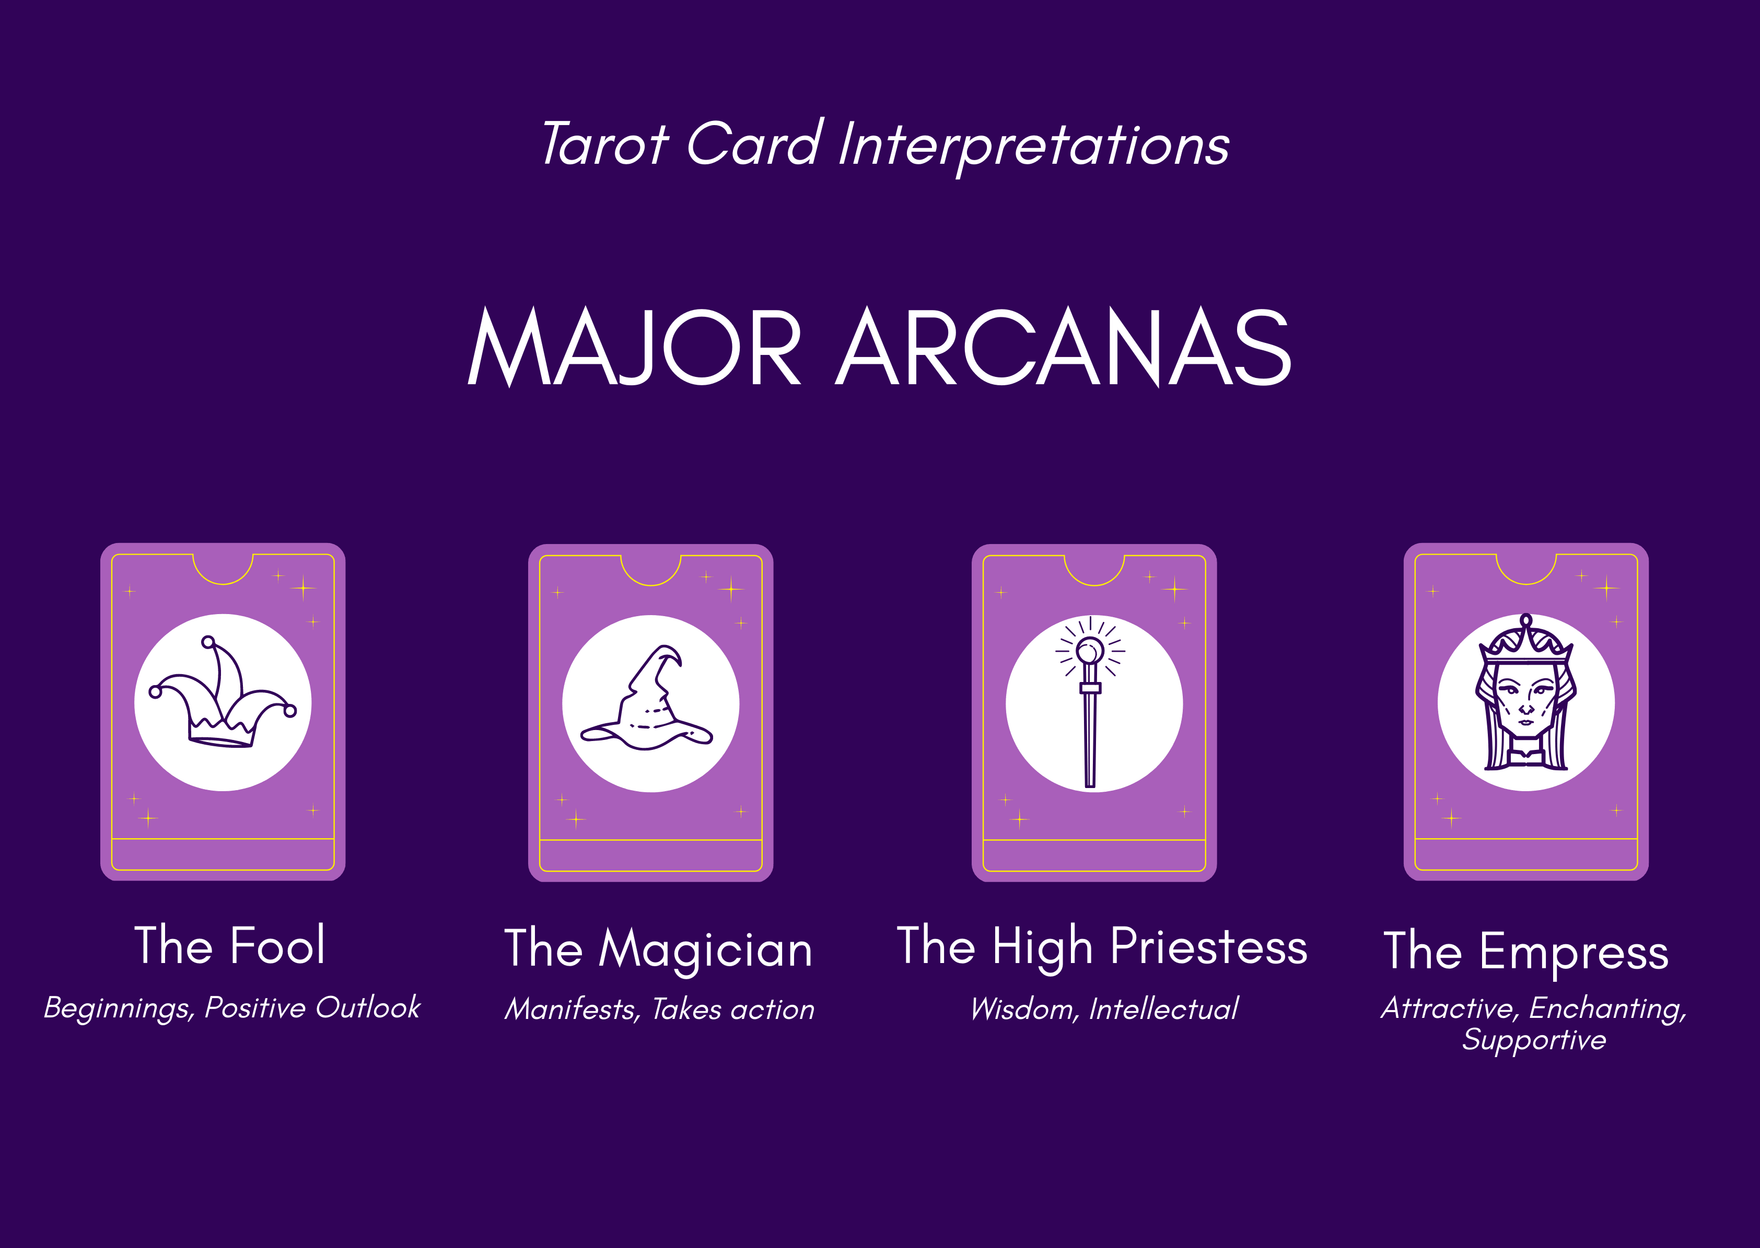 Tarot Template in Word - FREE Download | Template.net